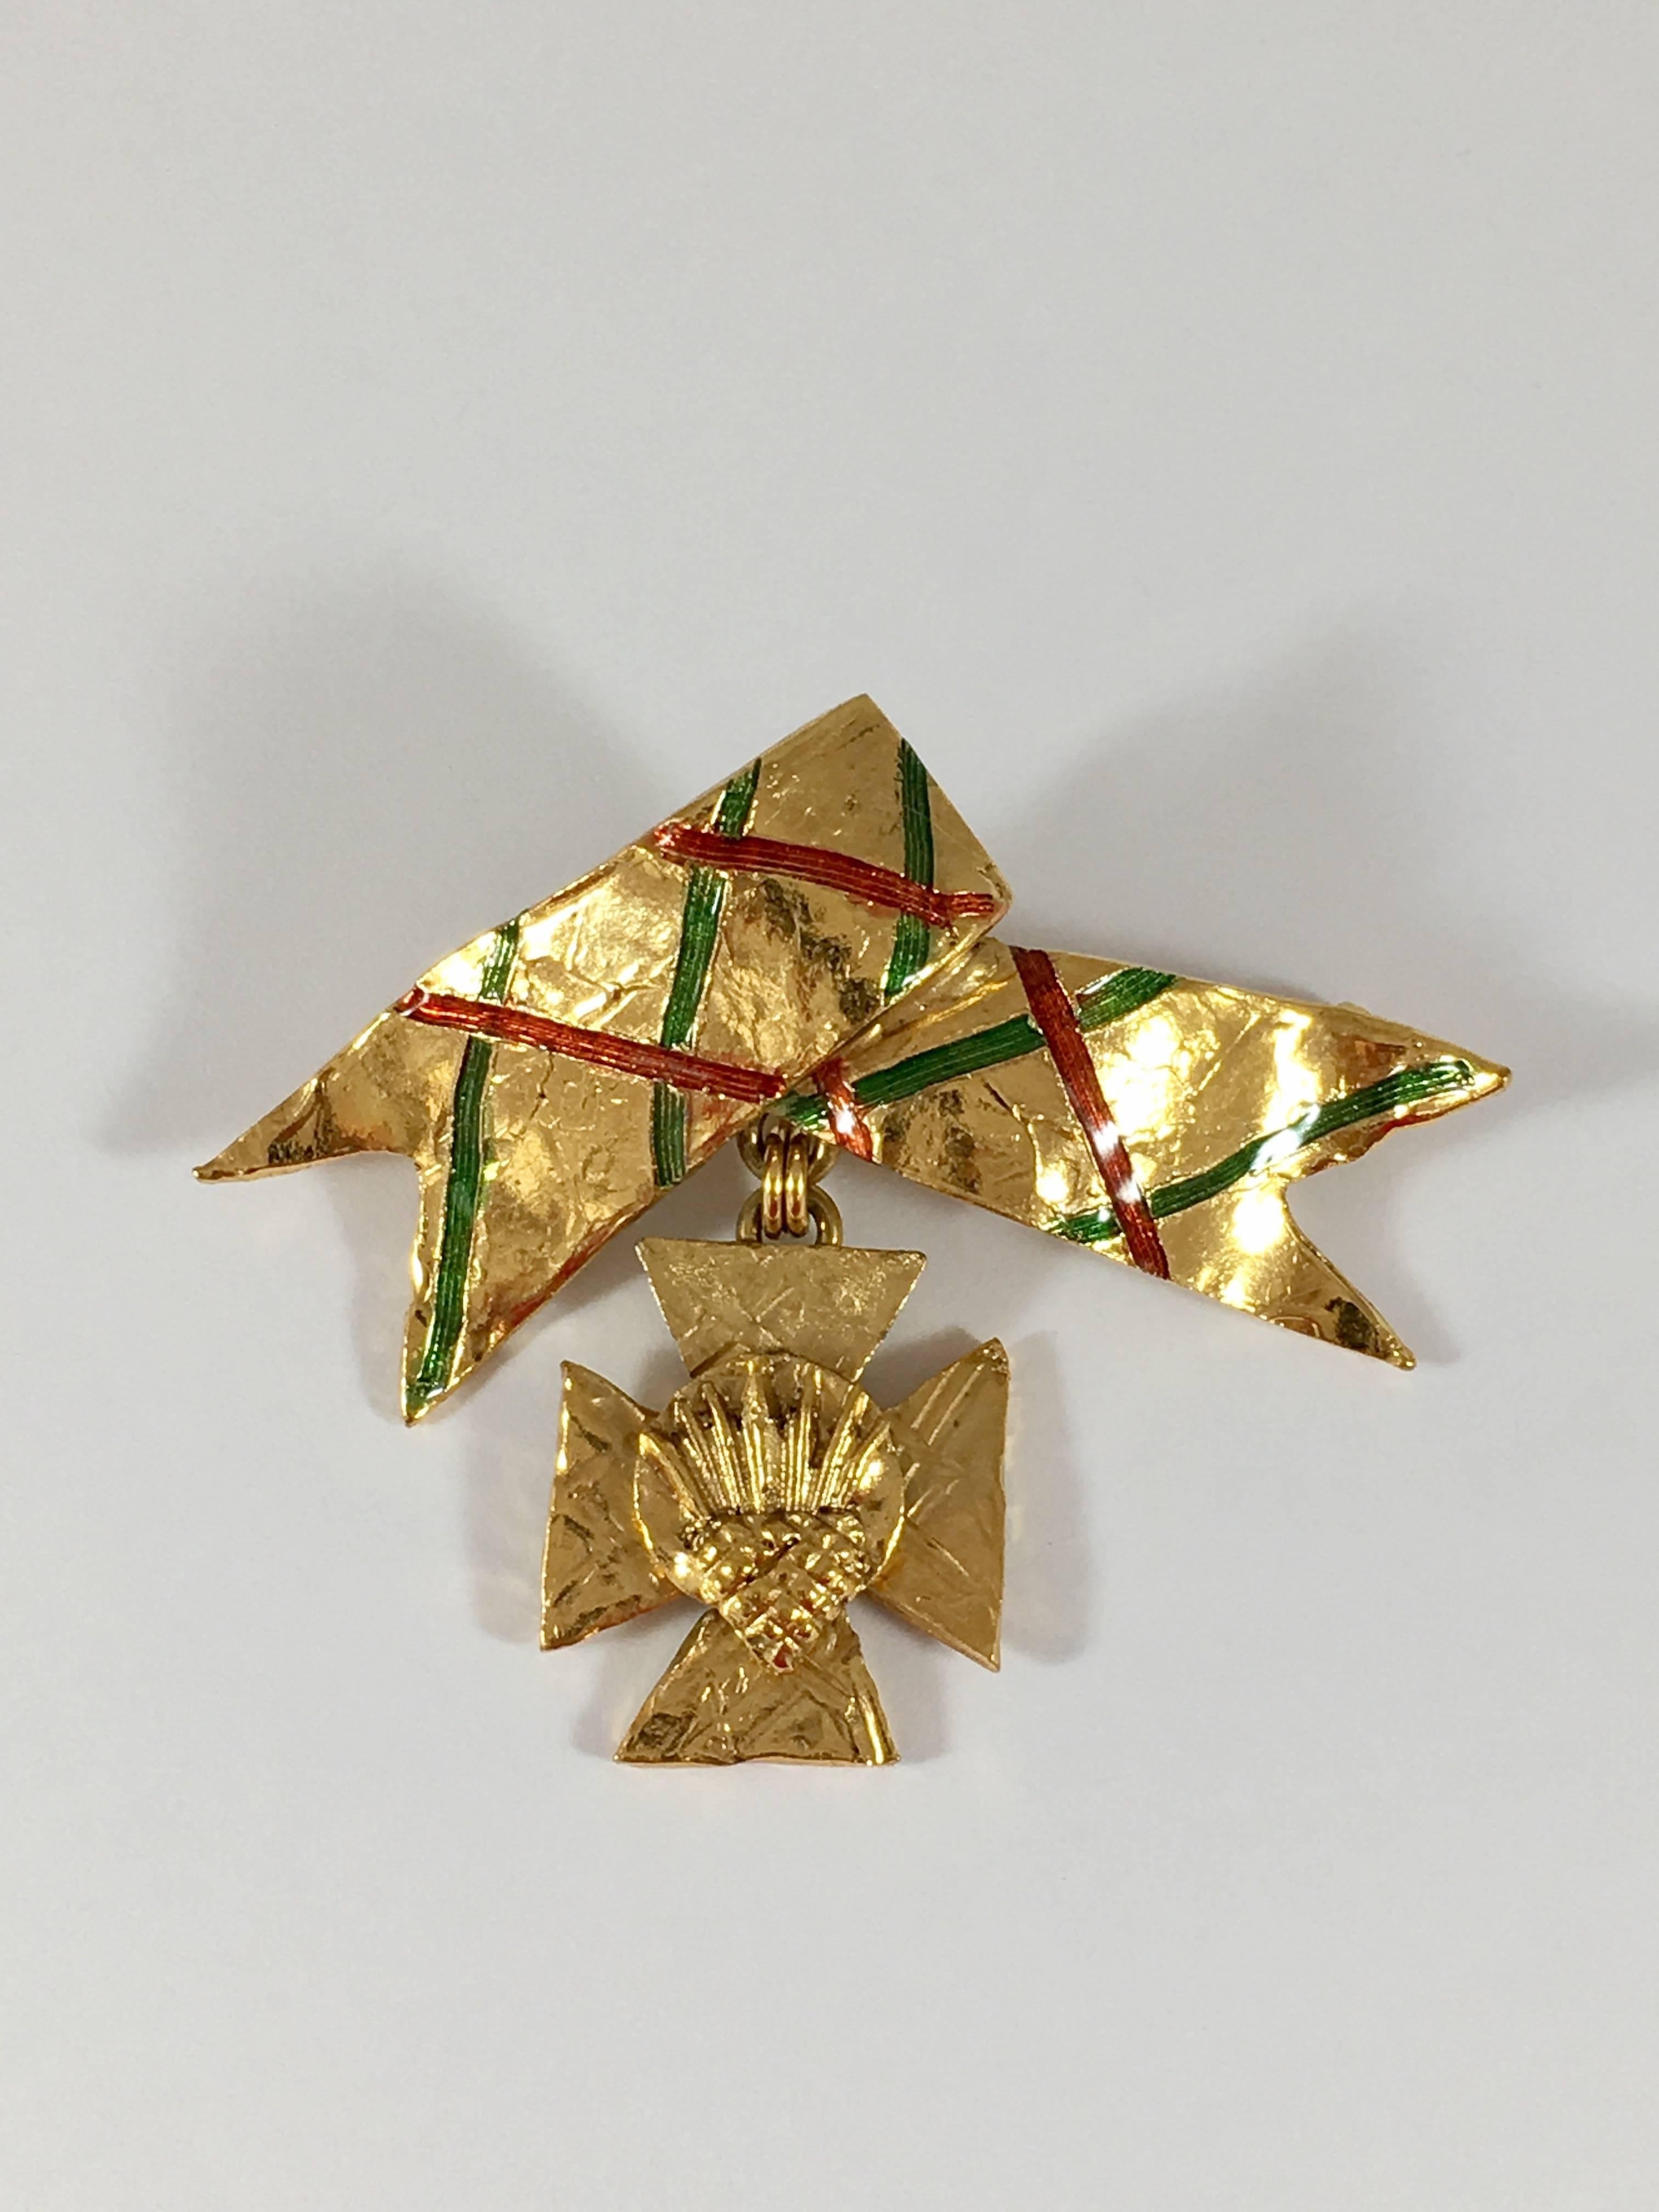 This is a fabulous 1980s Yves Saint Laurent Rive Gauche brooch/pendant. It has a very Scottish feel to it with its plaid ribbon and with the thistle design used in the center of the cross. The brooch can also be worn as a pendant. There is a hook on